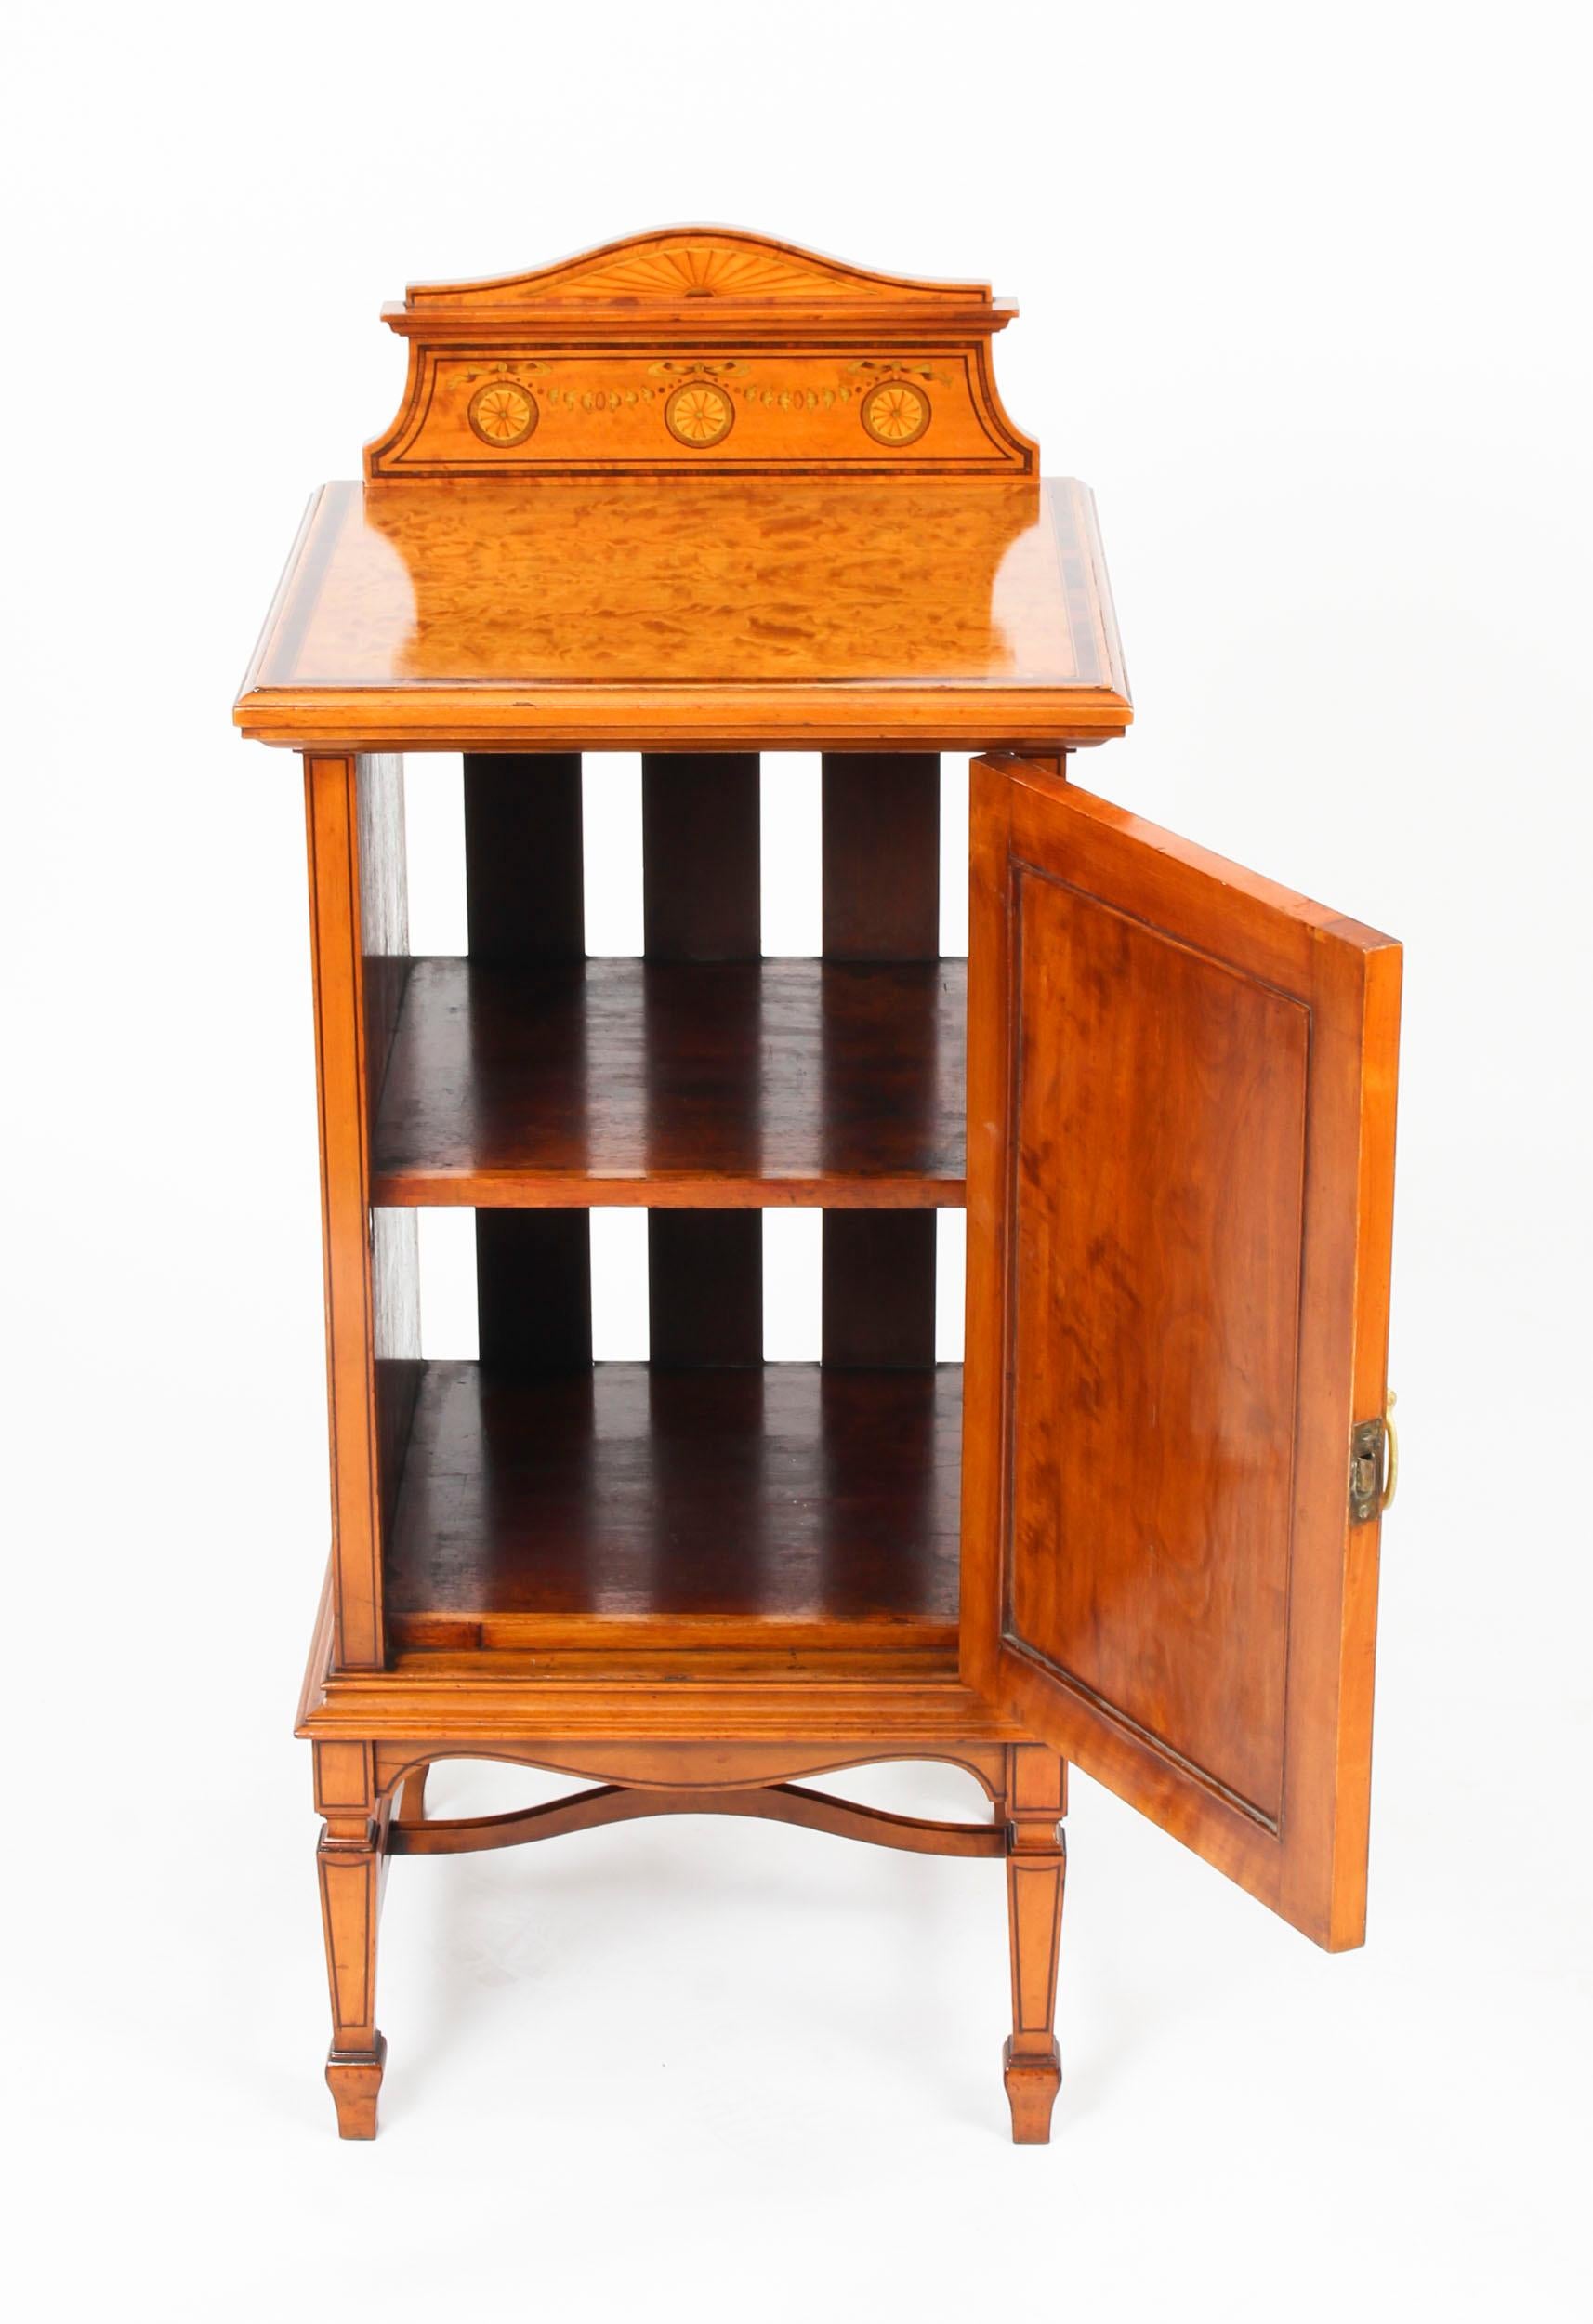 Antique Victorian Satinwood & Inlaid Bedside Cabinet, 19th Century For Sale 2